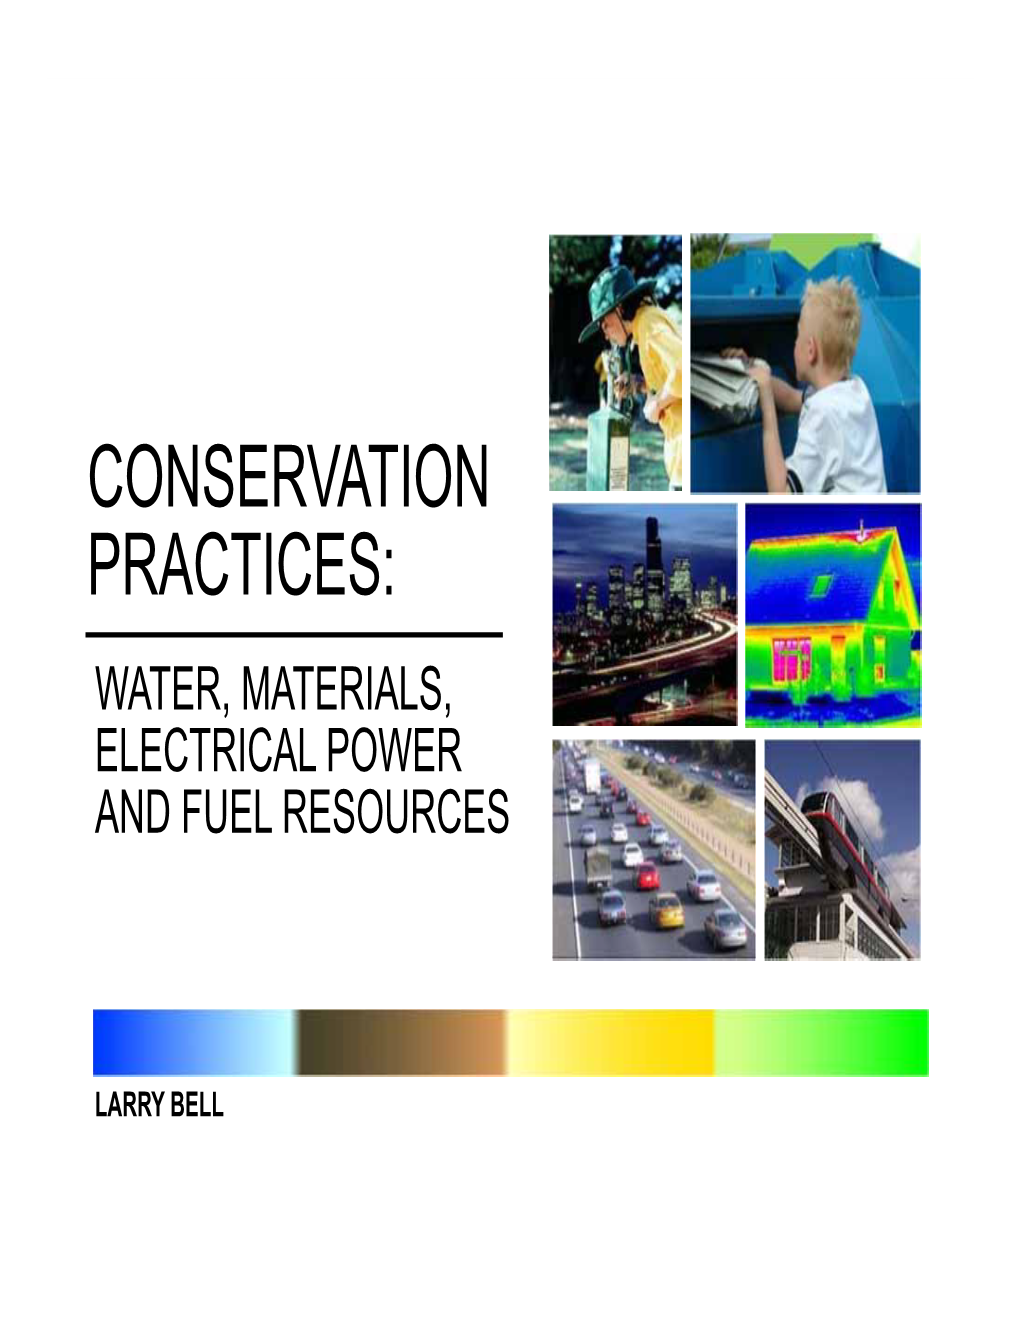 Conservation Practices: Water, Materials, Electrical Power and Fuel Resources